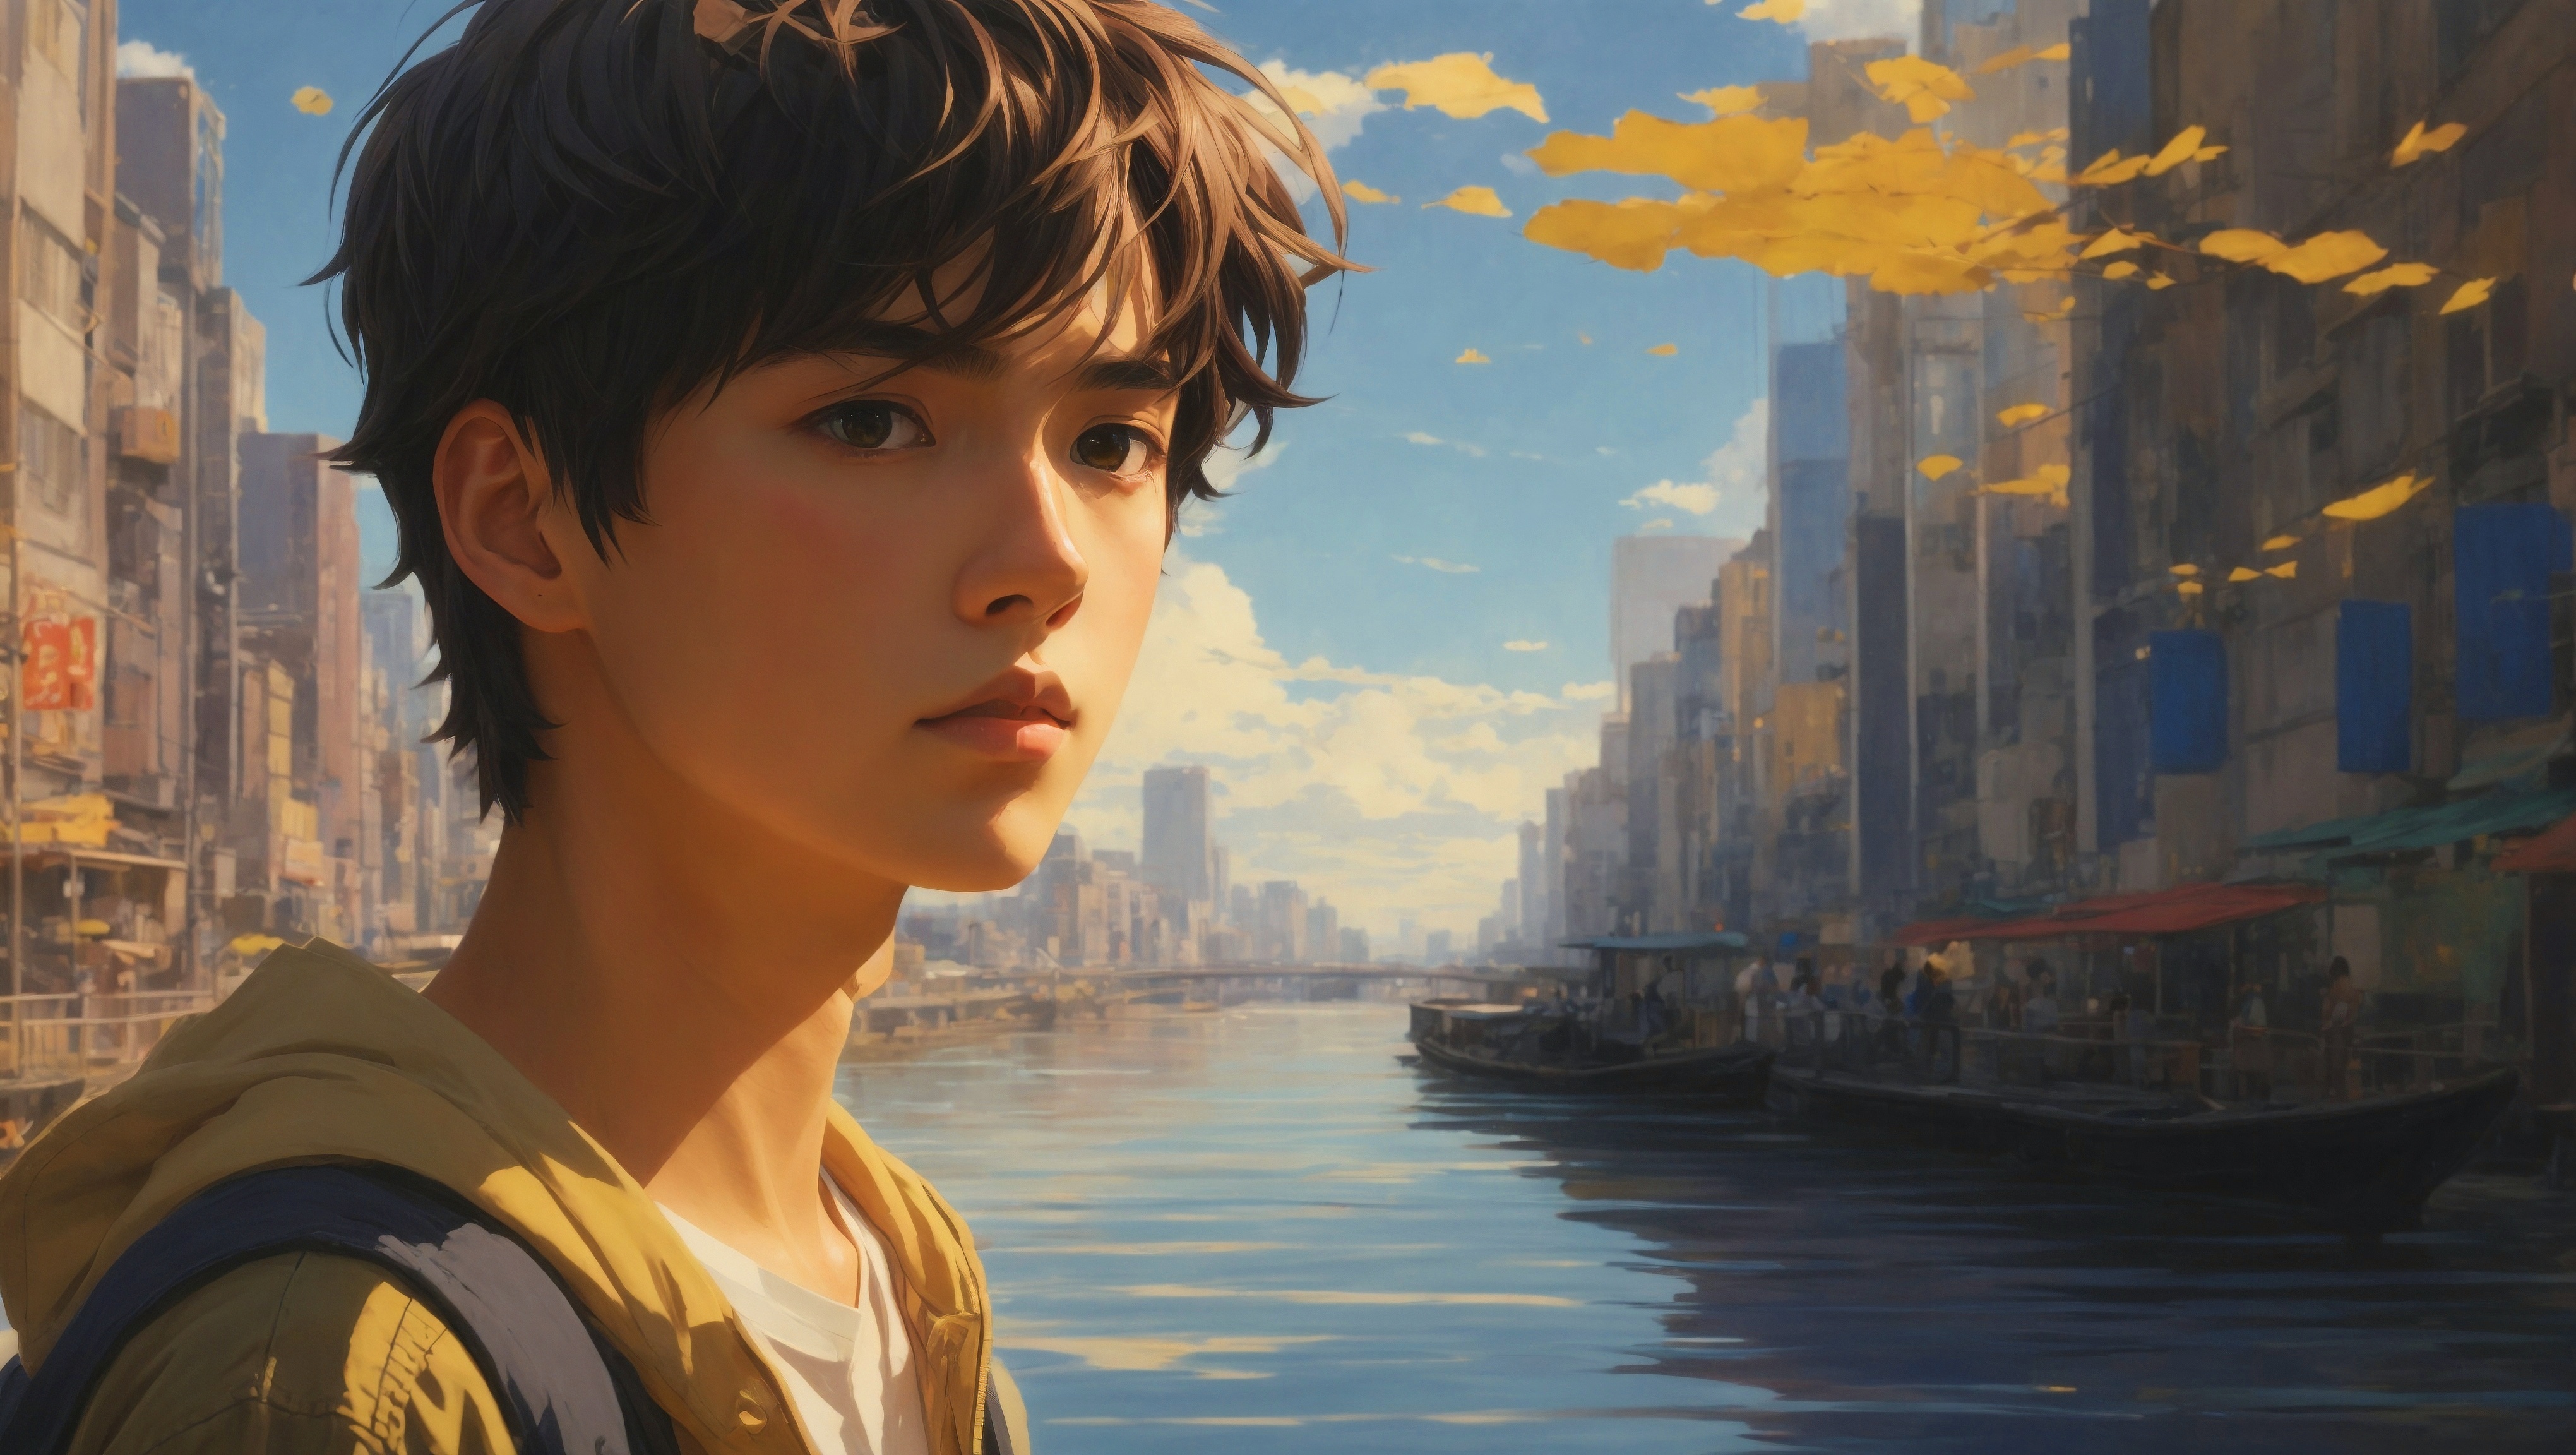 Free photo A painting depicting a boy in an urban setting